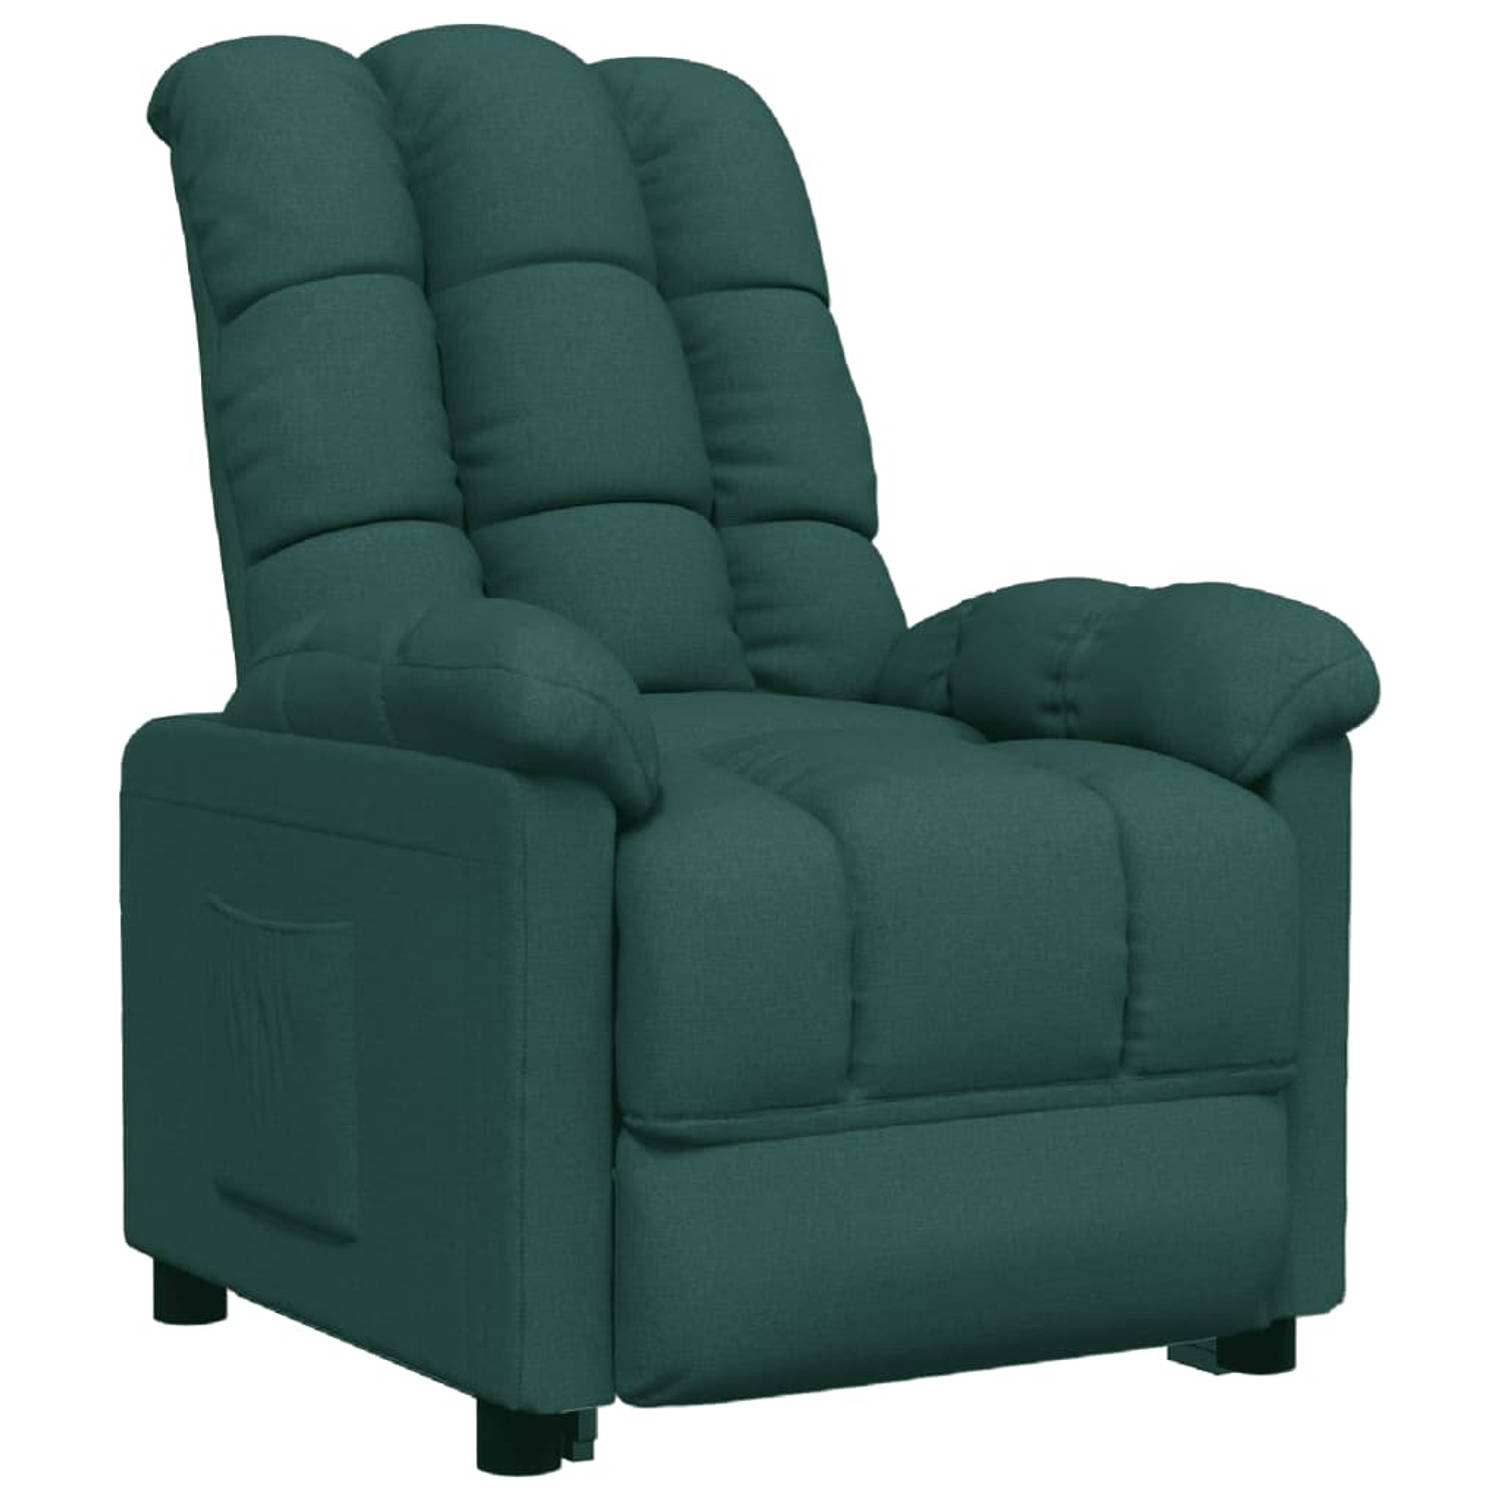 The Living Store Verstelbare Fauteuil - Donkergroen - 74 x 99 x 102 cm - Stof (100% polyester)